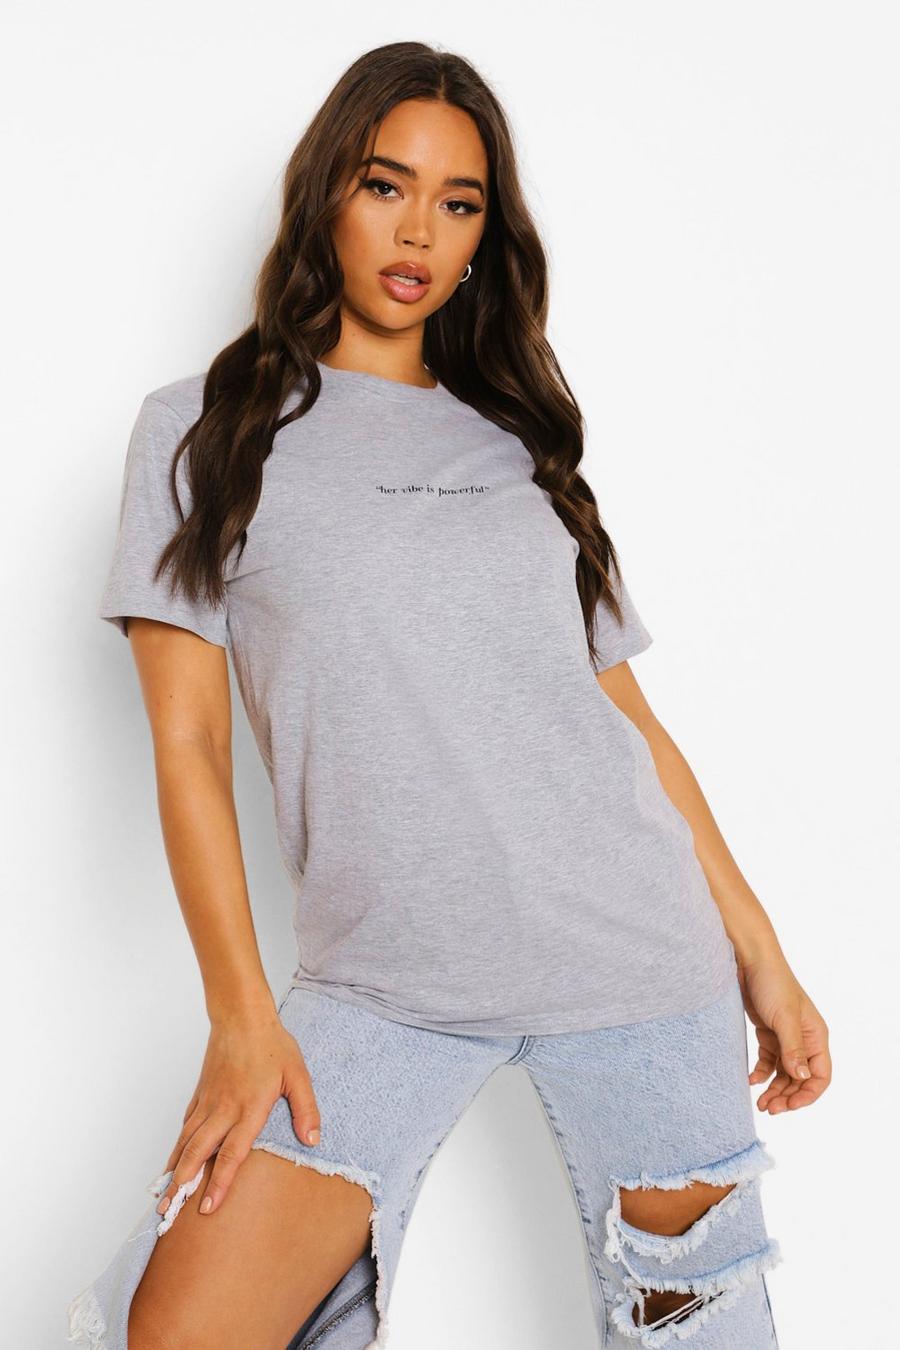 Grey marl Her Vibe Is Powerful T-Shirt image number 1